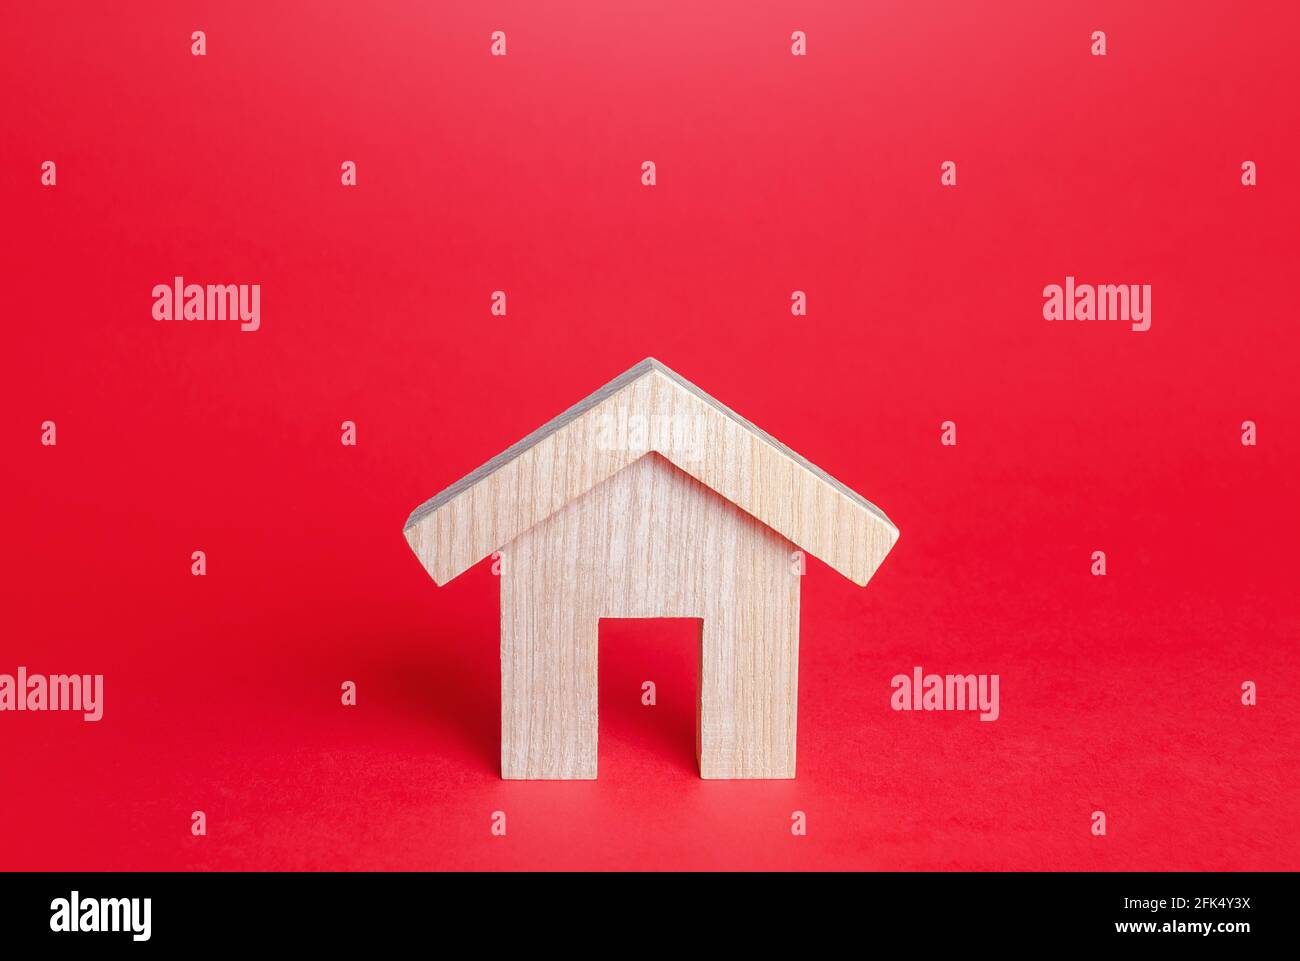 Wooden house on a red background. Buying and selling. Housing, realtor services. Mortgage loan. Renovation and home improvement. Building maintenance. Stock Photo